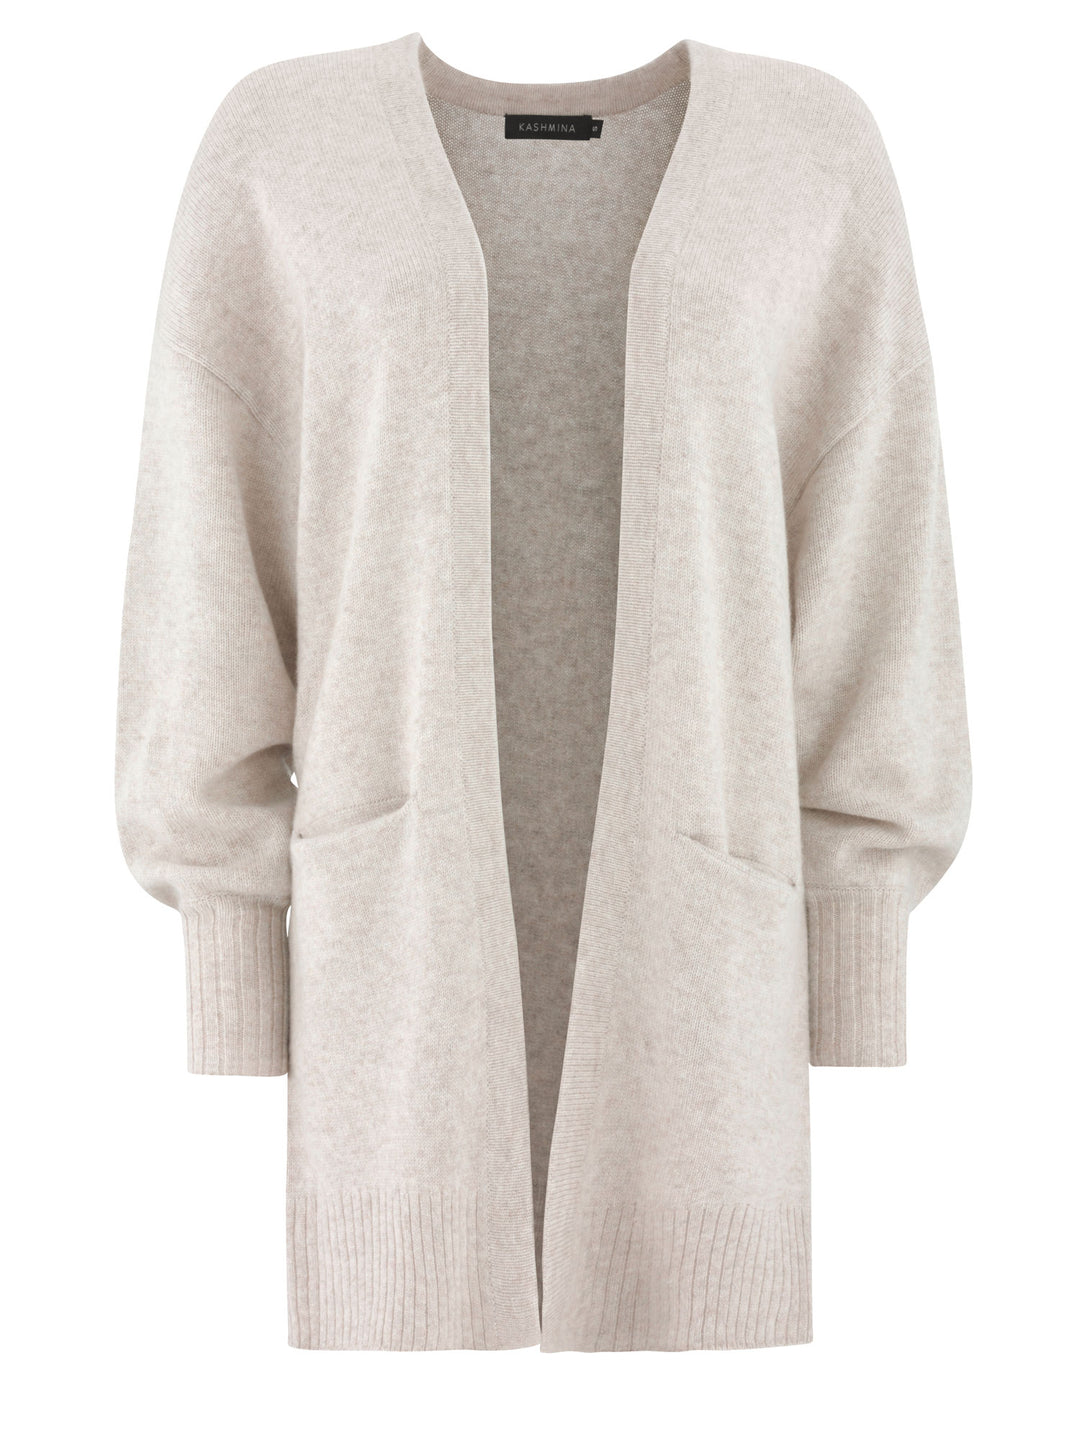 Cashmere cardigan in 100% cashmere by Kashmina